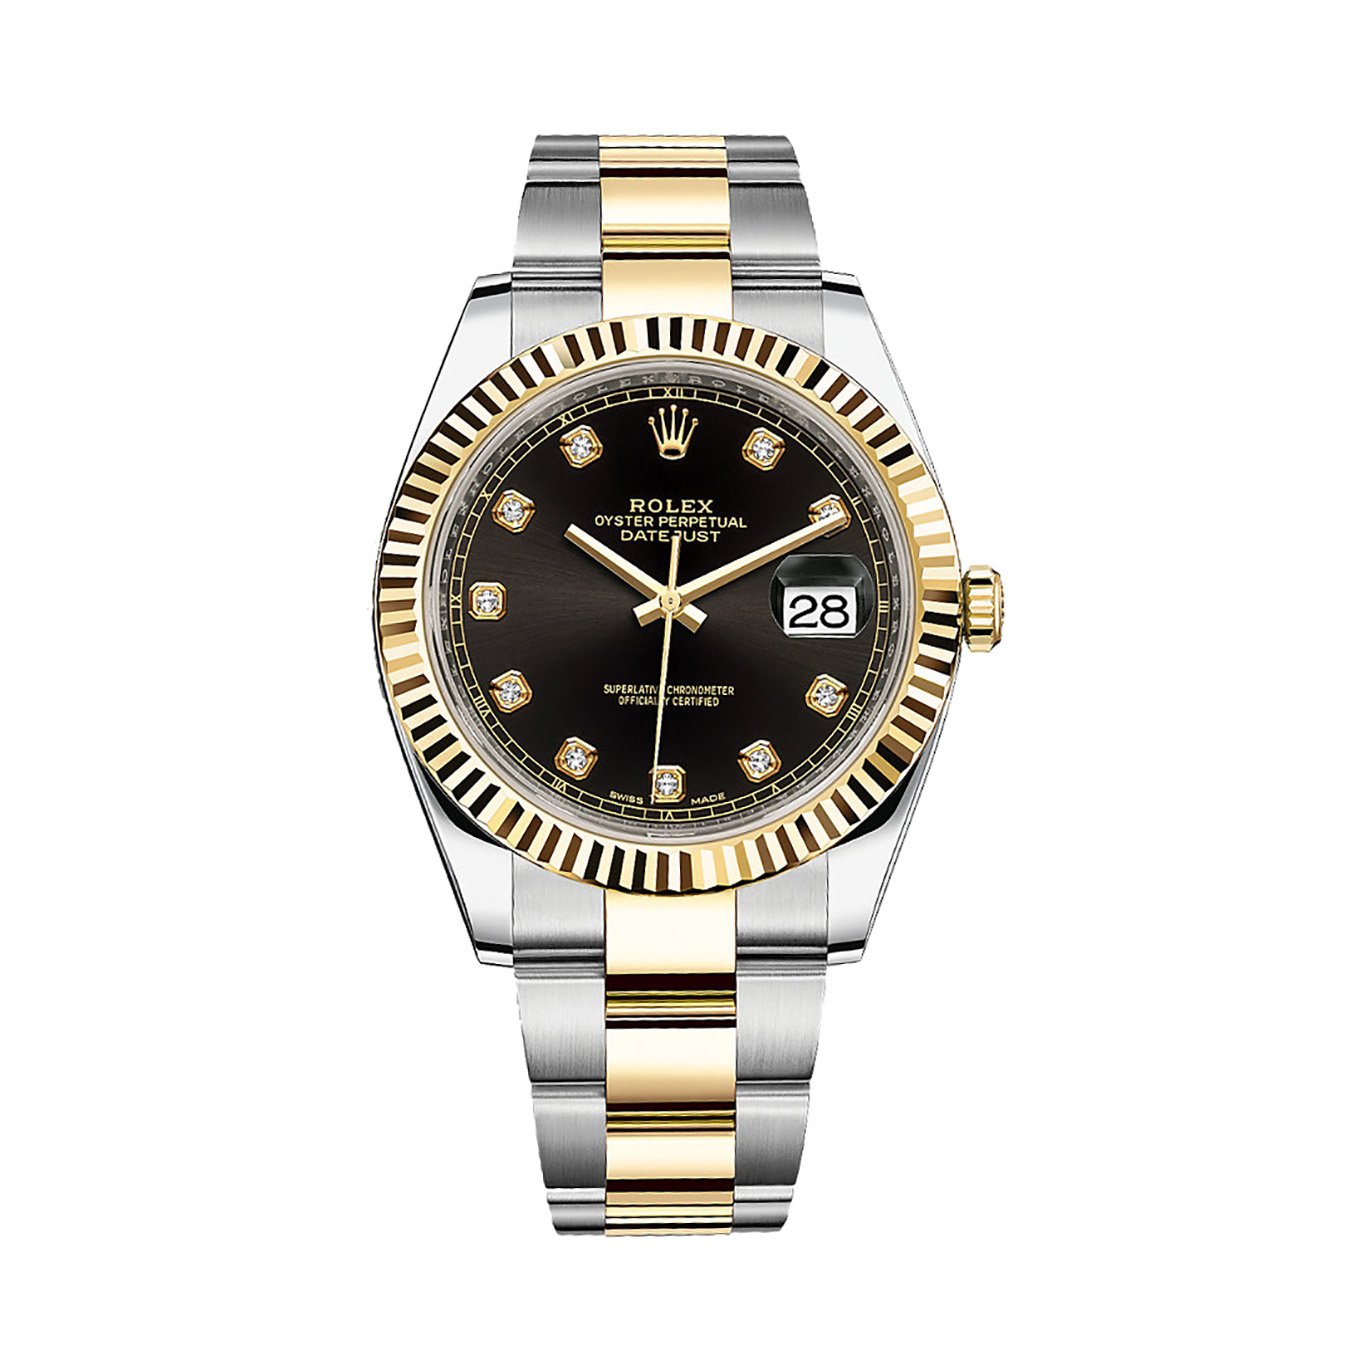 Datejust 41 126333 Gold & Stainless Steel Watch (Black Set With Diamonds)